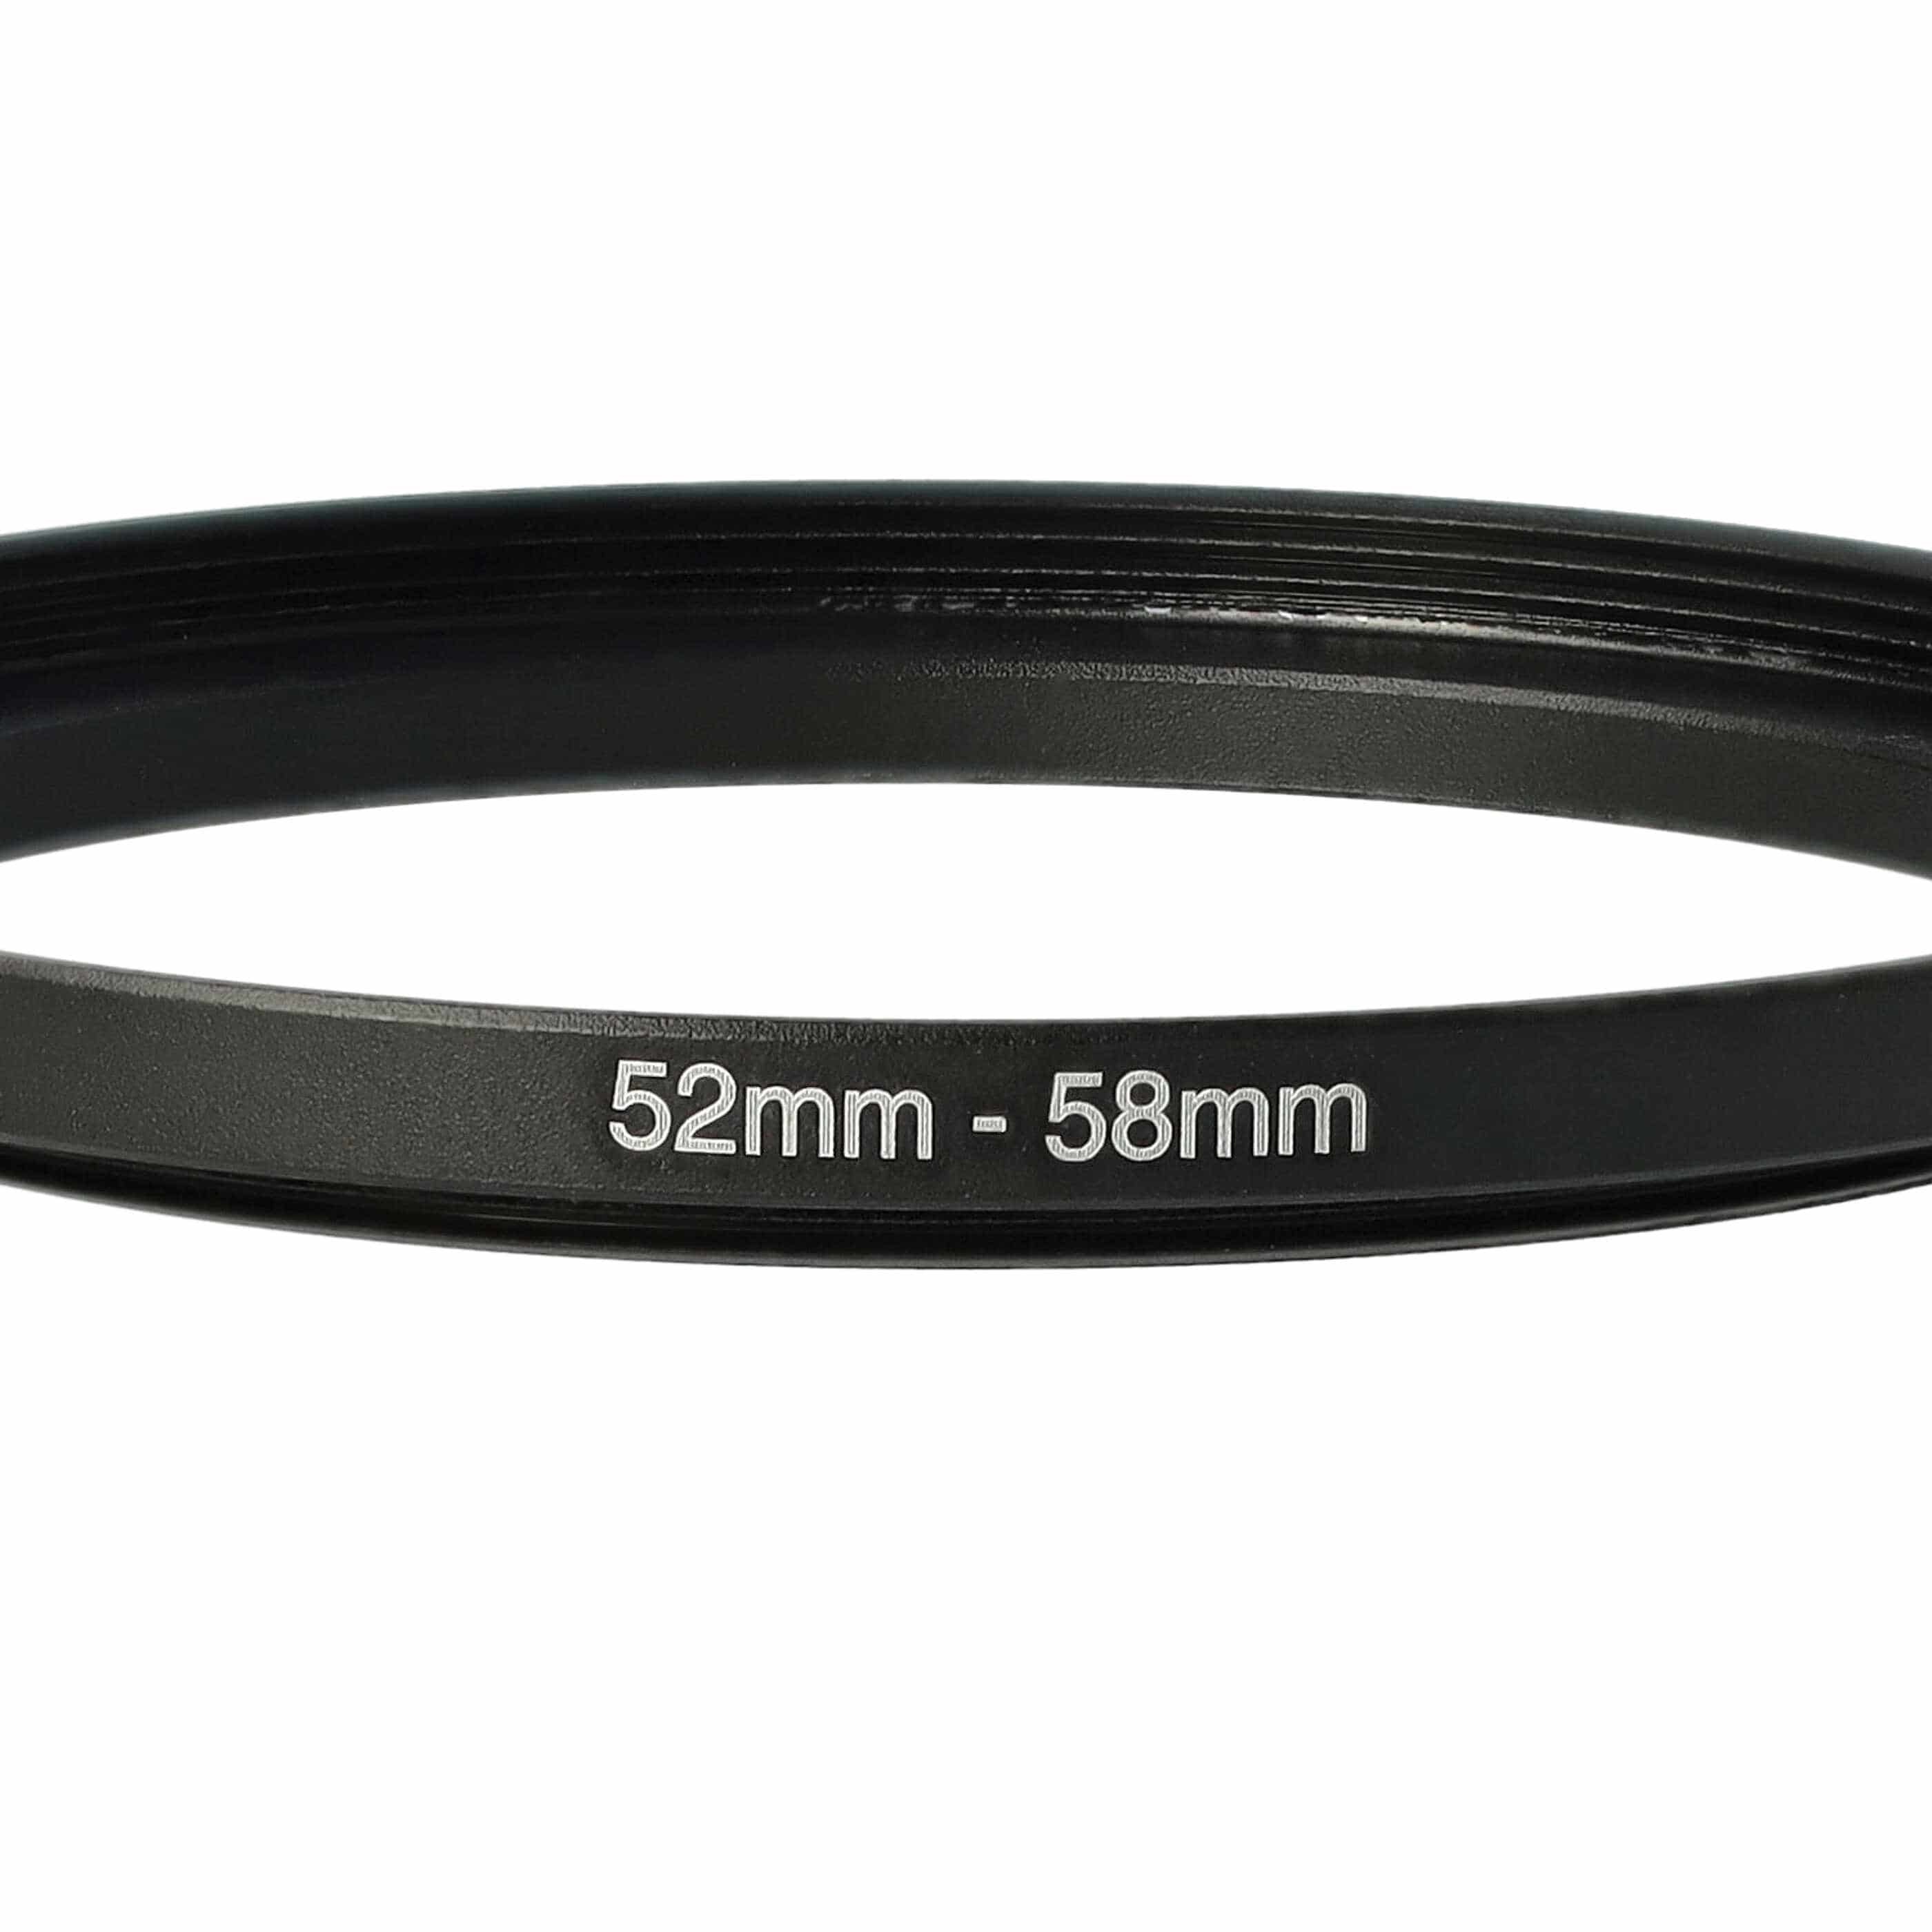 Step-Up Ring Adapter of 52 mm to 58 mmfor various Camera Lens - Filter Adapter